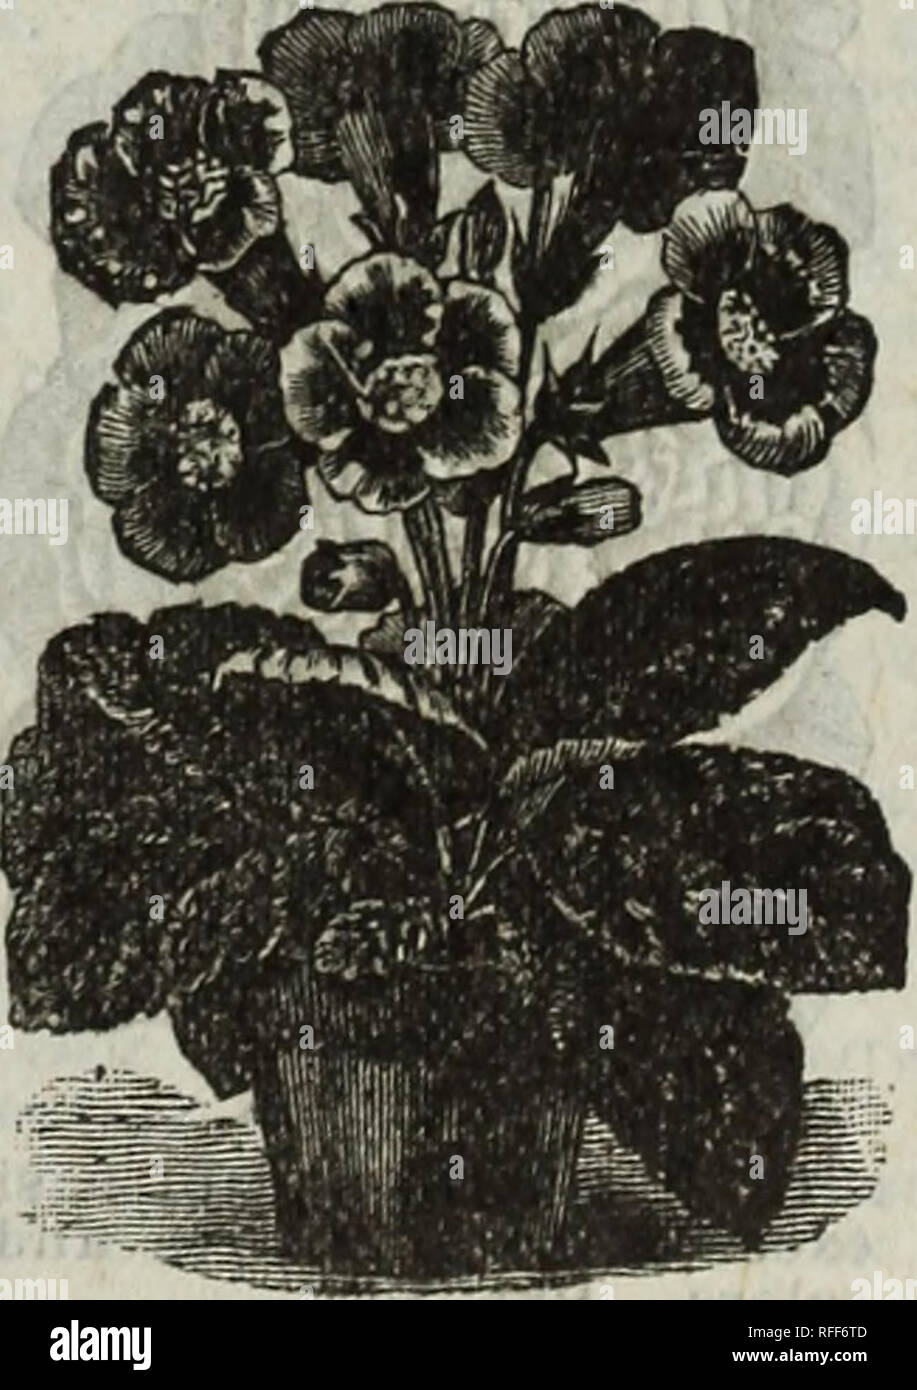 . 1902 vegetables, flowers, grains &amp; fruits : 22nd annual catalogue / Ford Seed Co.. Nursery stock Ohio Catalogs; Vegetables Seeds Catalogs; Flowers Seeds Catalogs; Fruit Catalogs. DIANTIIUS OR PINKS. H. A. 91. Double Chi- nese Mixed. Extra choice. Pkt. 3c. 9'2. Heddewigrii. Japan Pink. Flowers large, double, finely col- ored and fringed. Pkt. 3c. 93. Laciuiatus. Double, fringed, fine mixture. Pkt. 3c. 94. Snowball. Pur- est white flowers of im- mense size, very double, delicately fringed. Pkt. 5c. ESCHOLTZIA. 95. Mixed. (Cali- fornia Poppy.) H. A. Large saucer shaped flowers of striking b Stock Photo